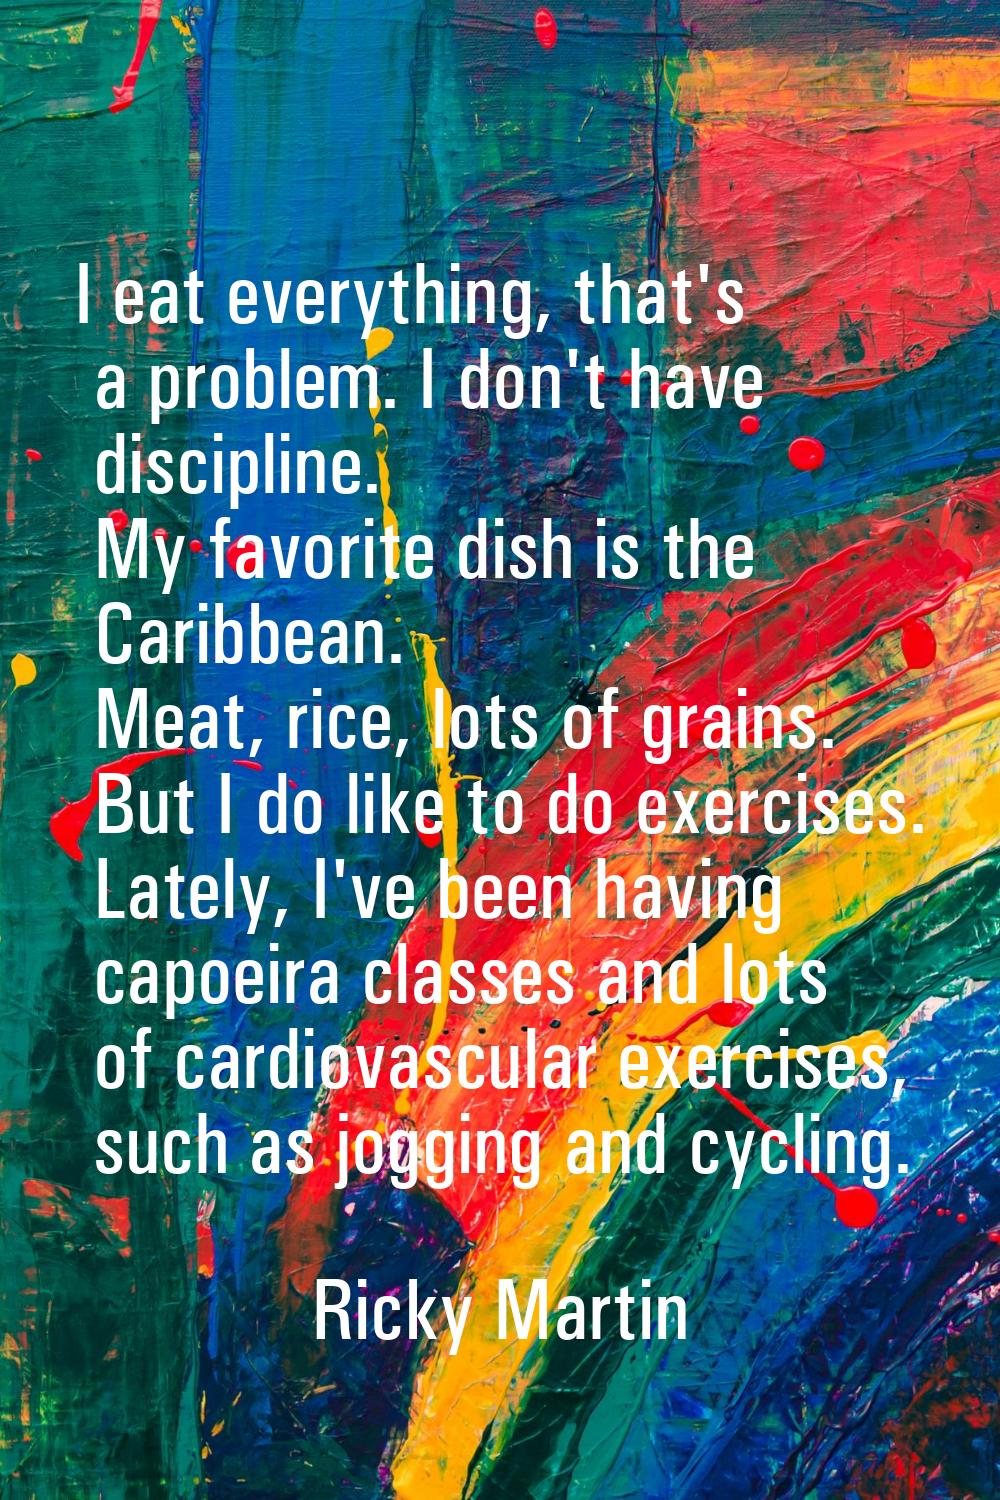 I eat everything, that's a problem. I don't have discipline. My favorite dish is the Caribbean. Mea